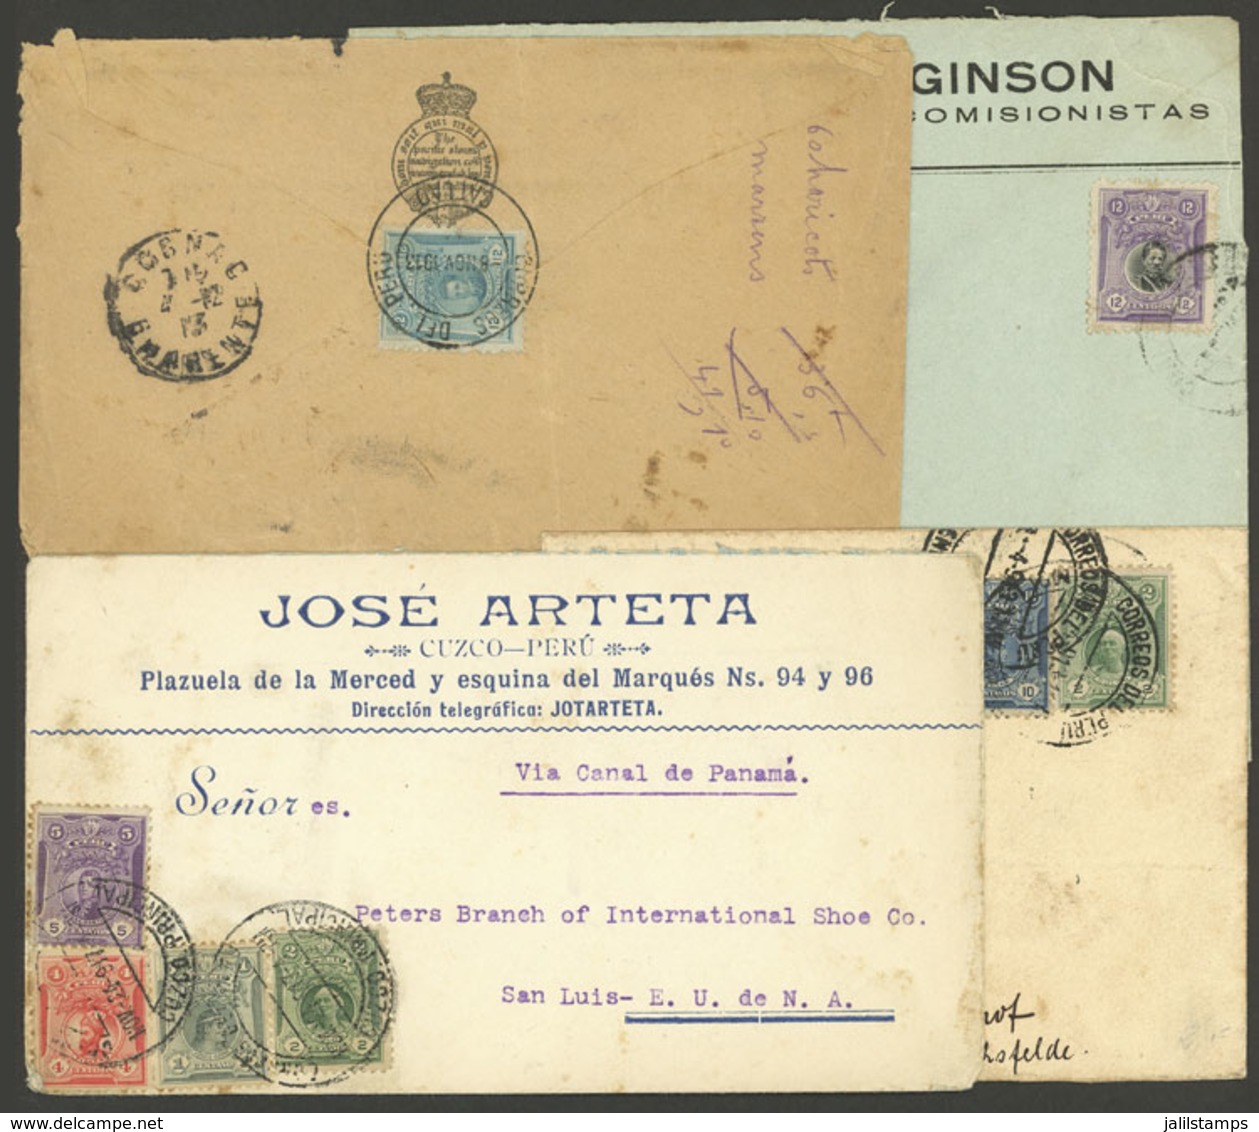 PERU: 4 Covers Mailed Overseas Between 1913 And 1917 Via The Panama Canal, With 12c. Postage (all Different), Very Nice! - Peru